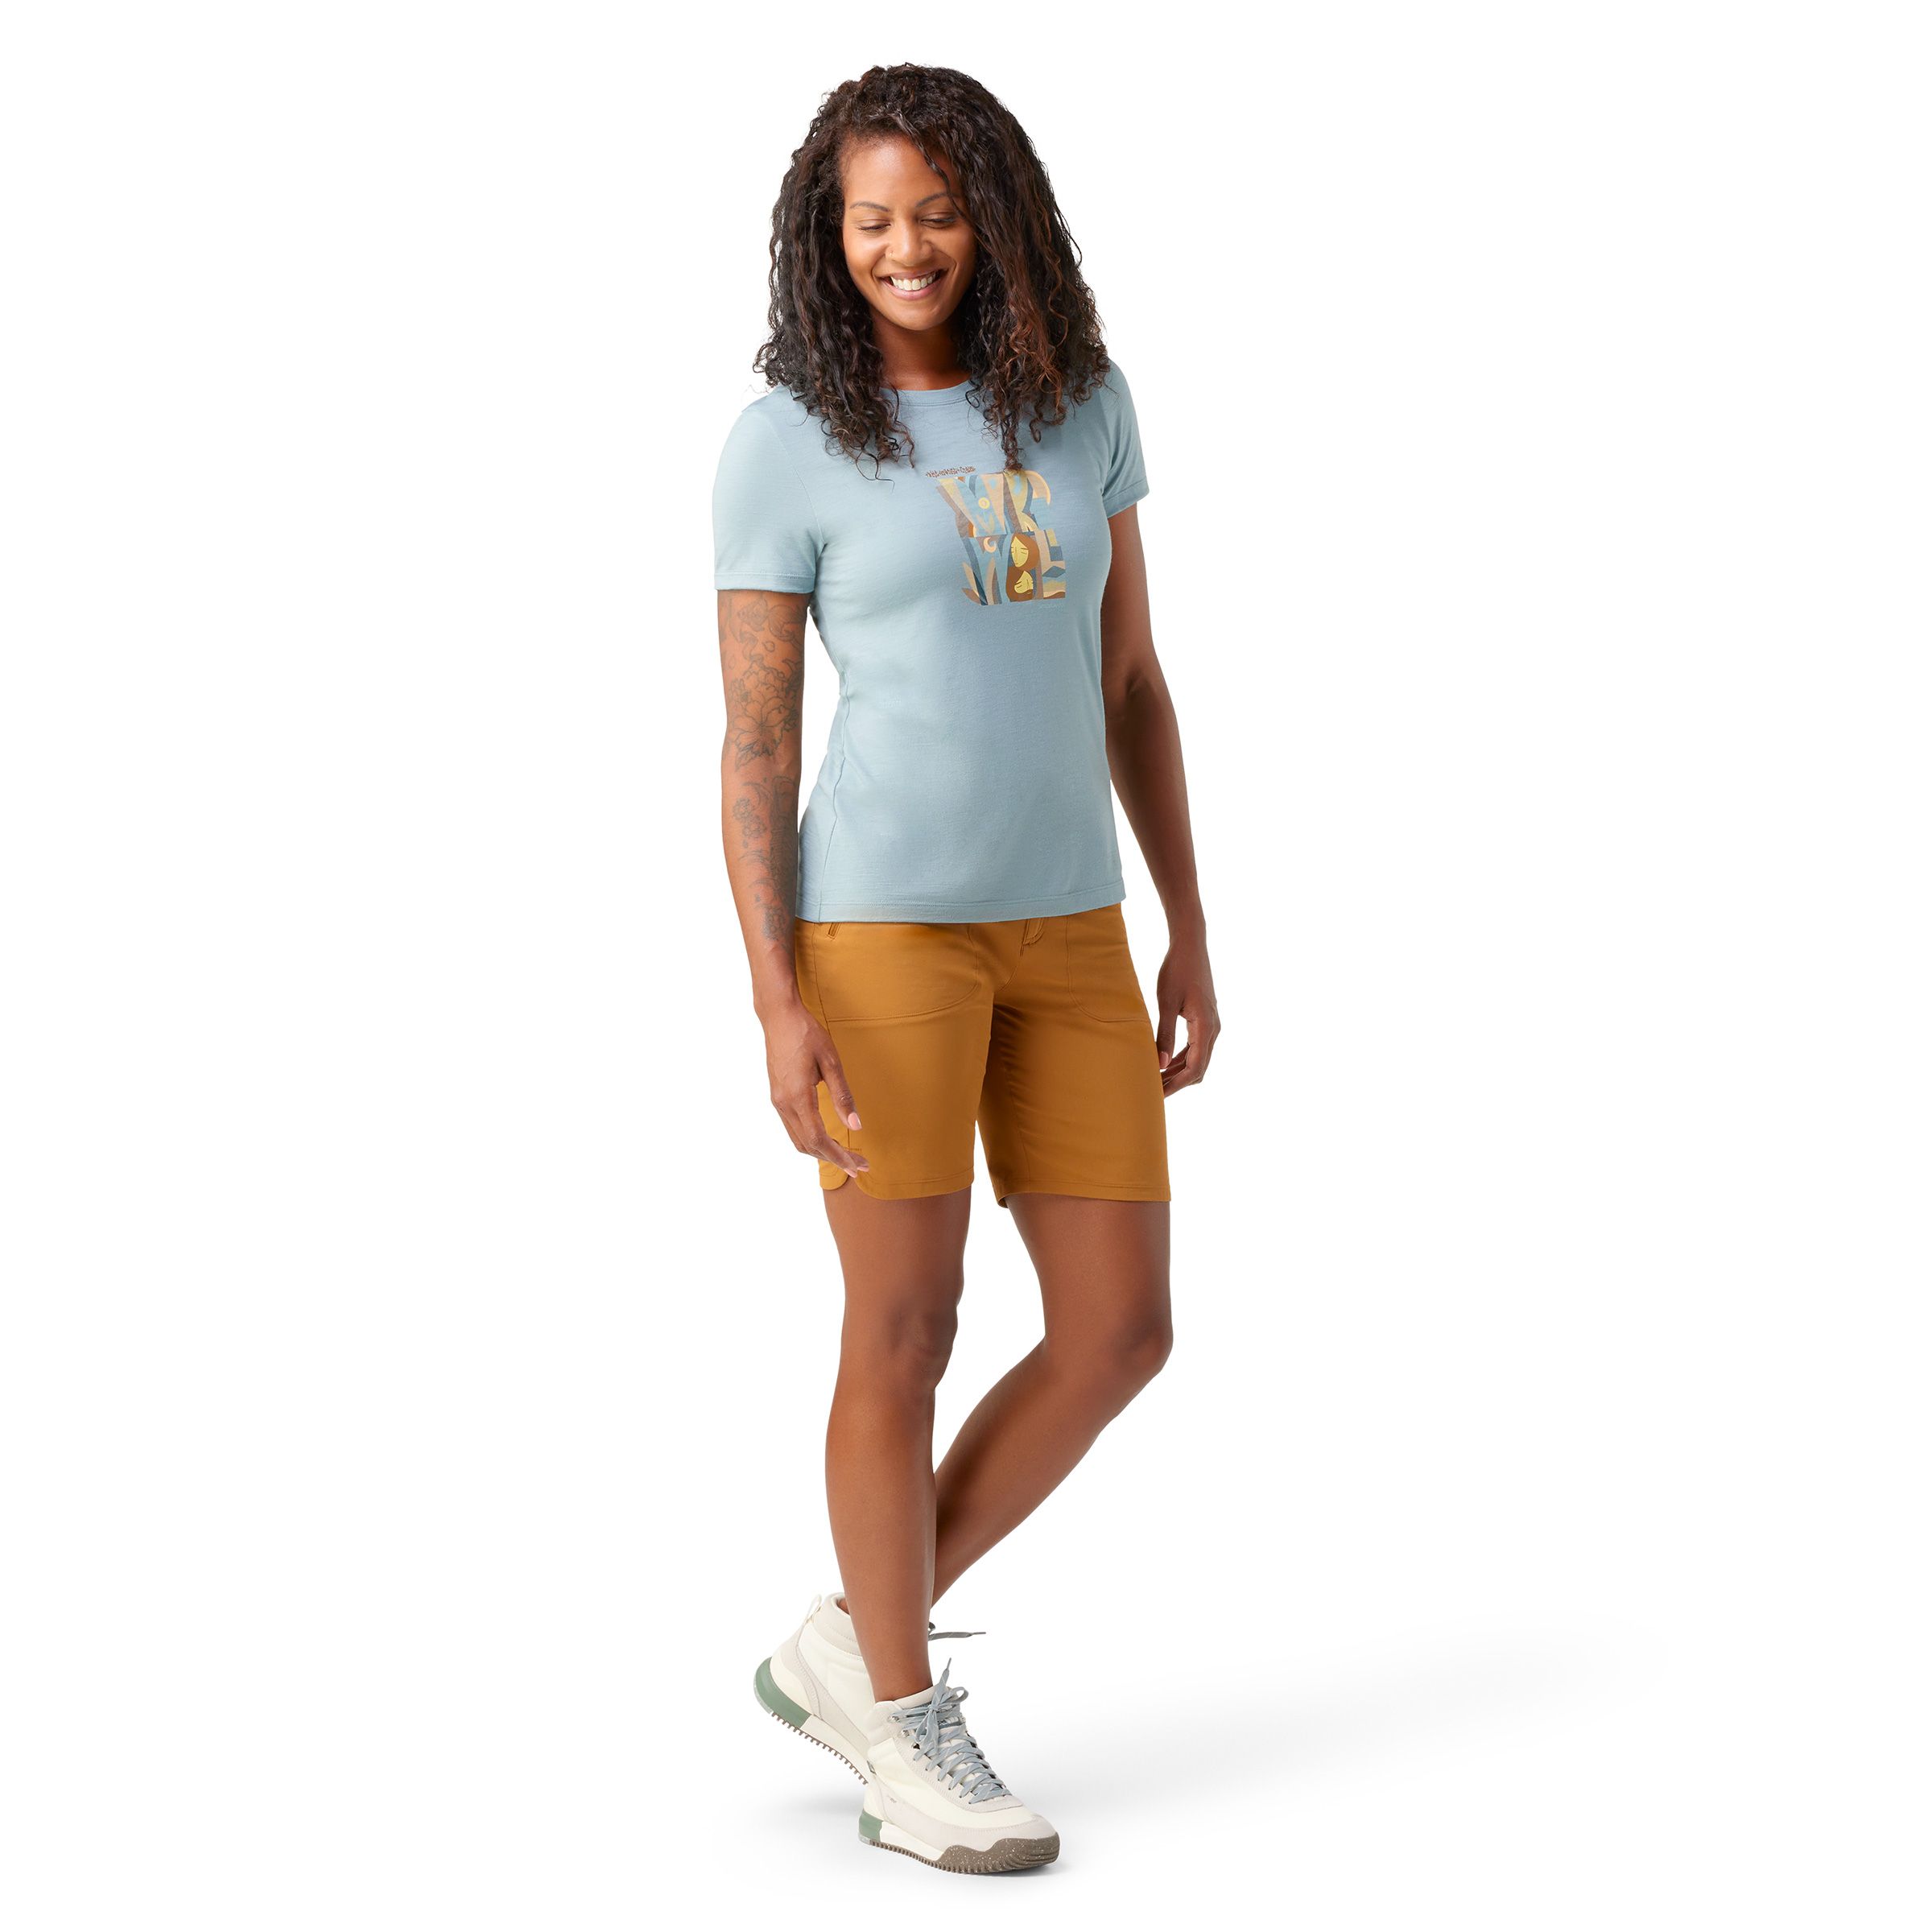 Women's Smartwool Carved Logo Graphic Short Sleeve Tee